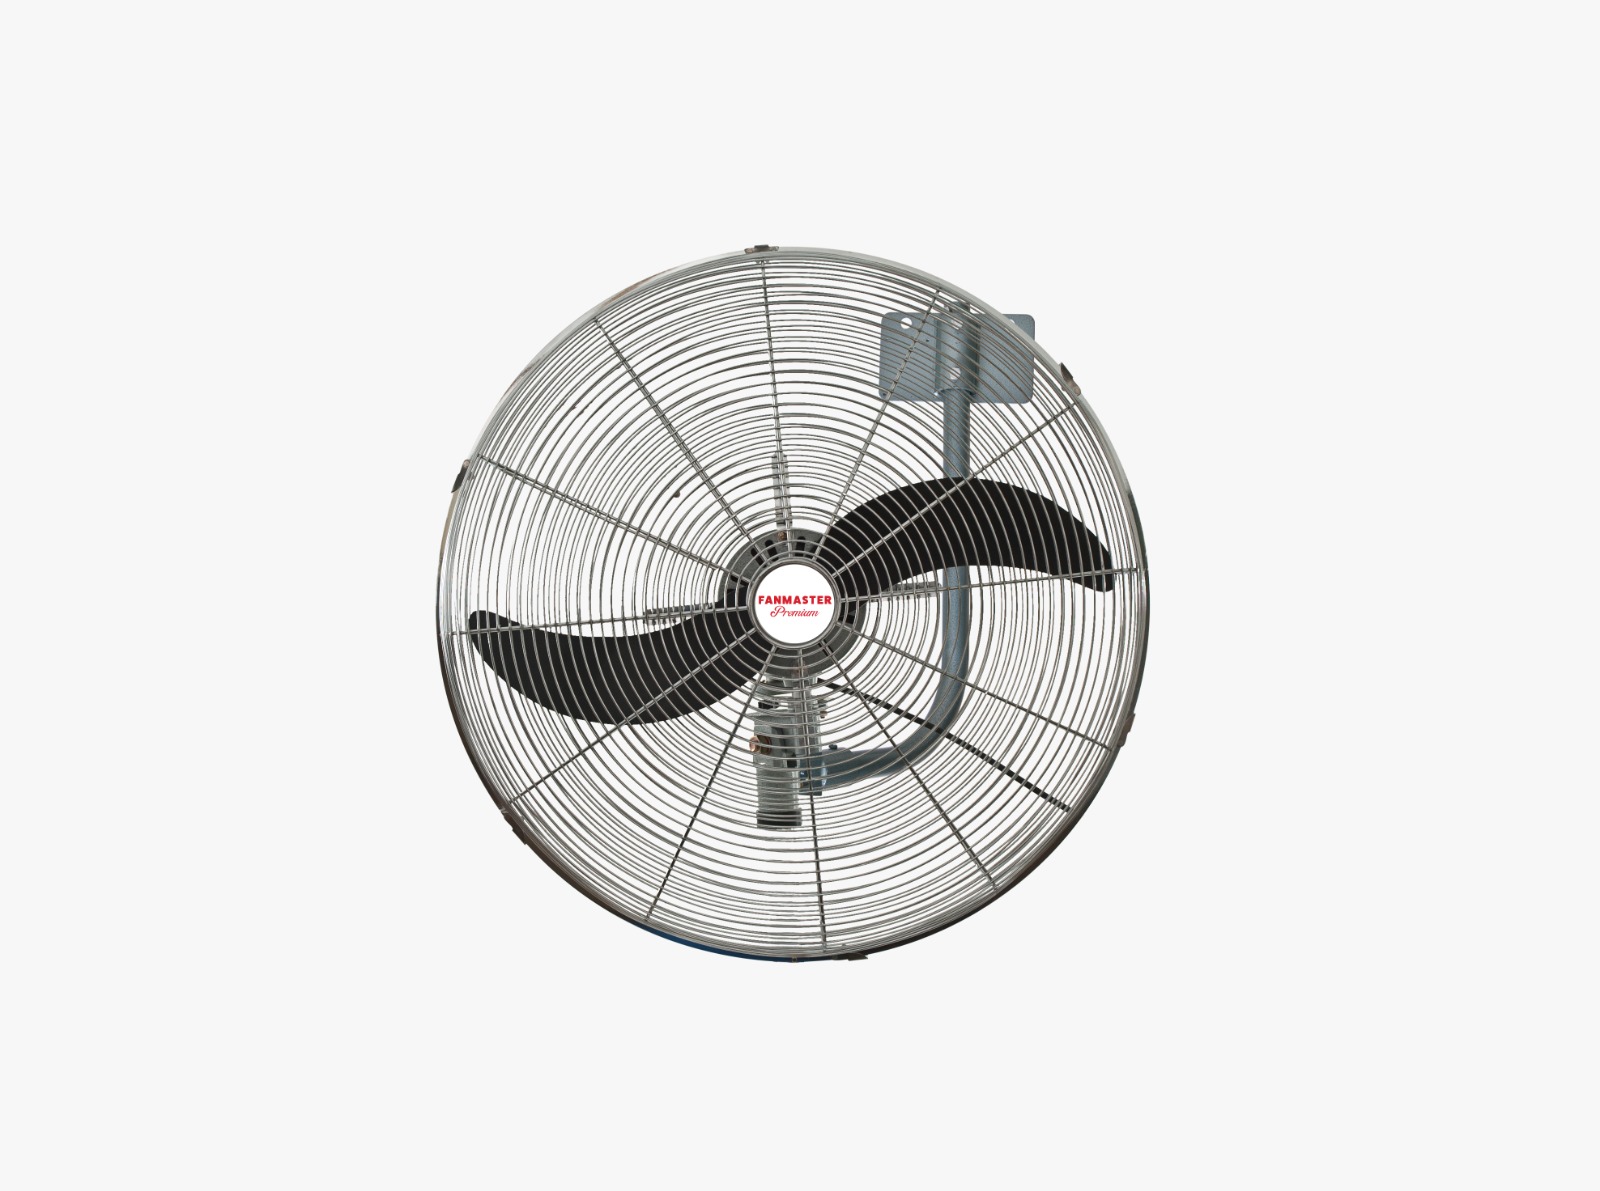 IFW500, IFW600 & IFW650 / Industrial Heating Cooling Ventilation Distribution Fans Warehouse Australia / Fanmaster